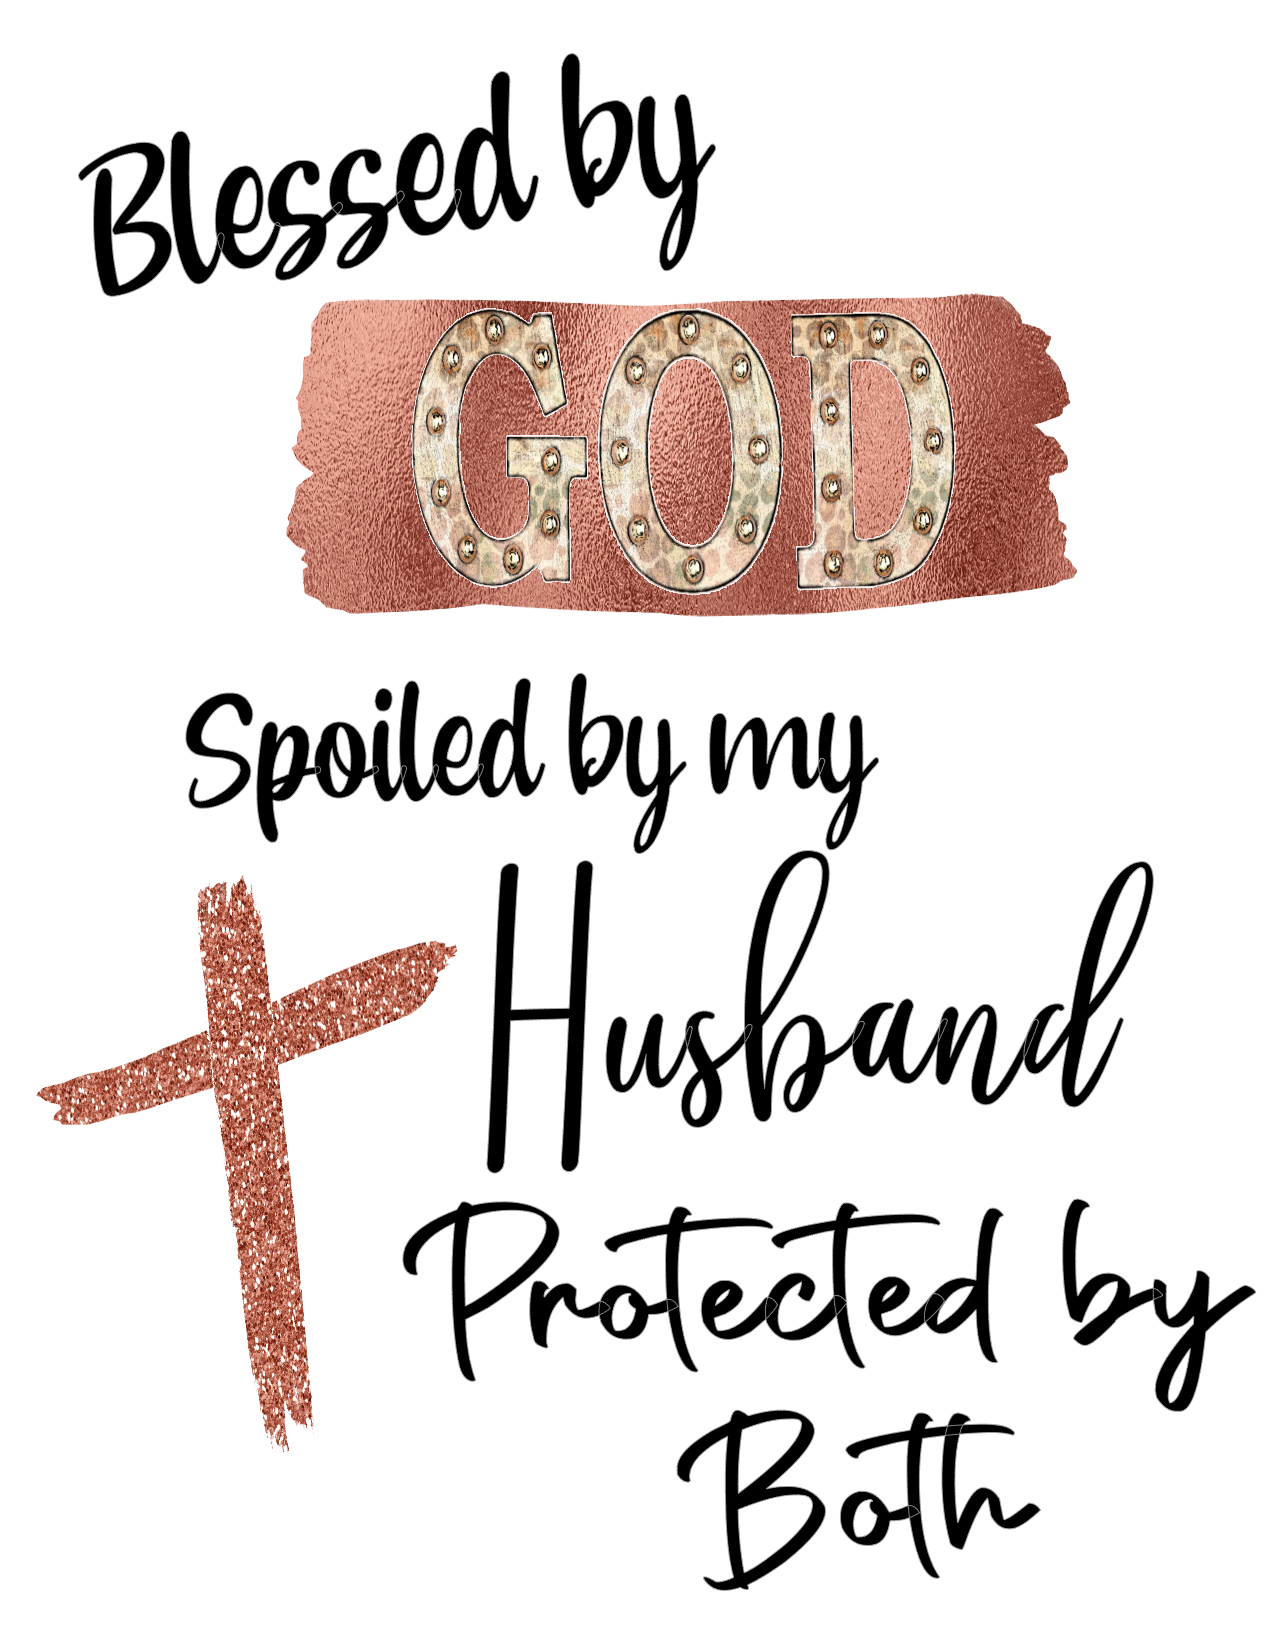 #68 Blessed by GOD Spoiled by my Husband Protected by Both